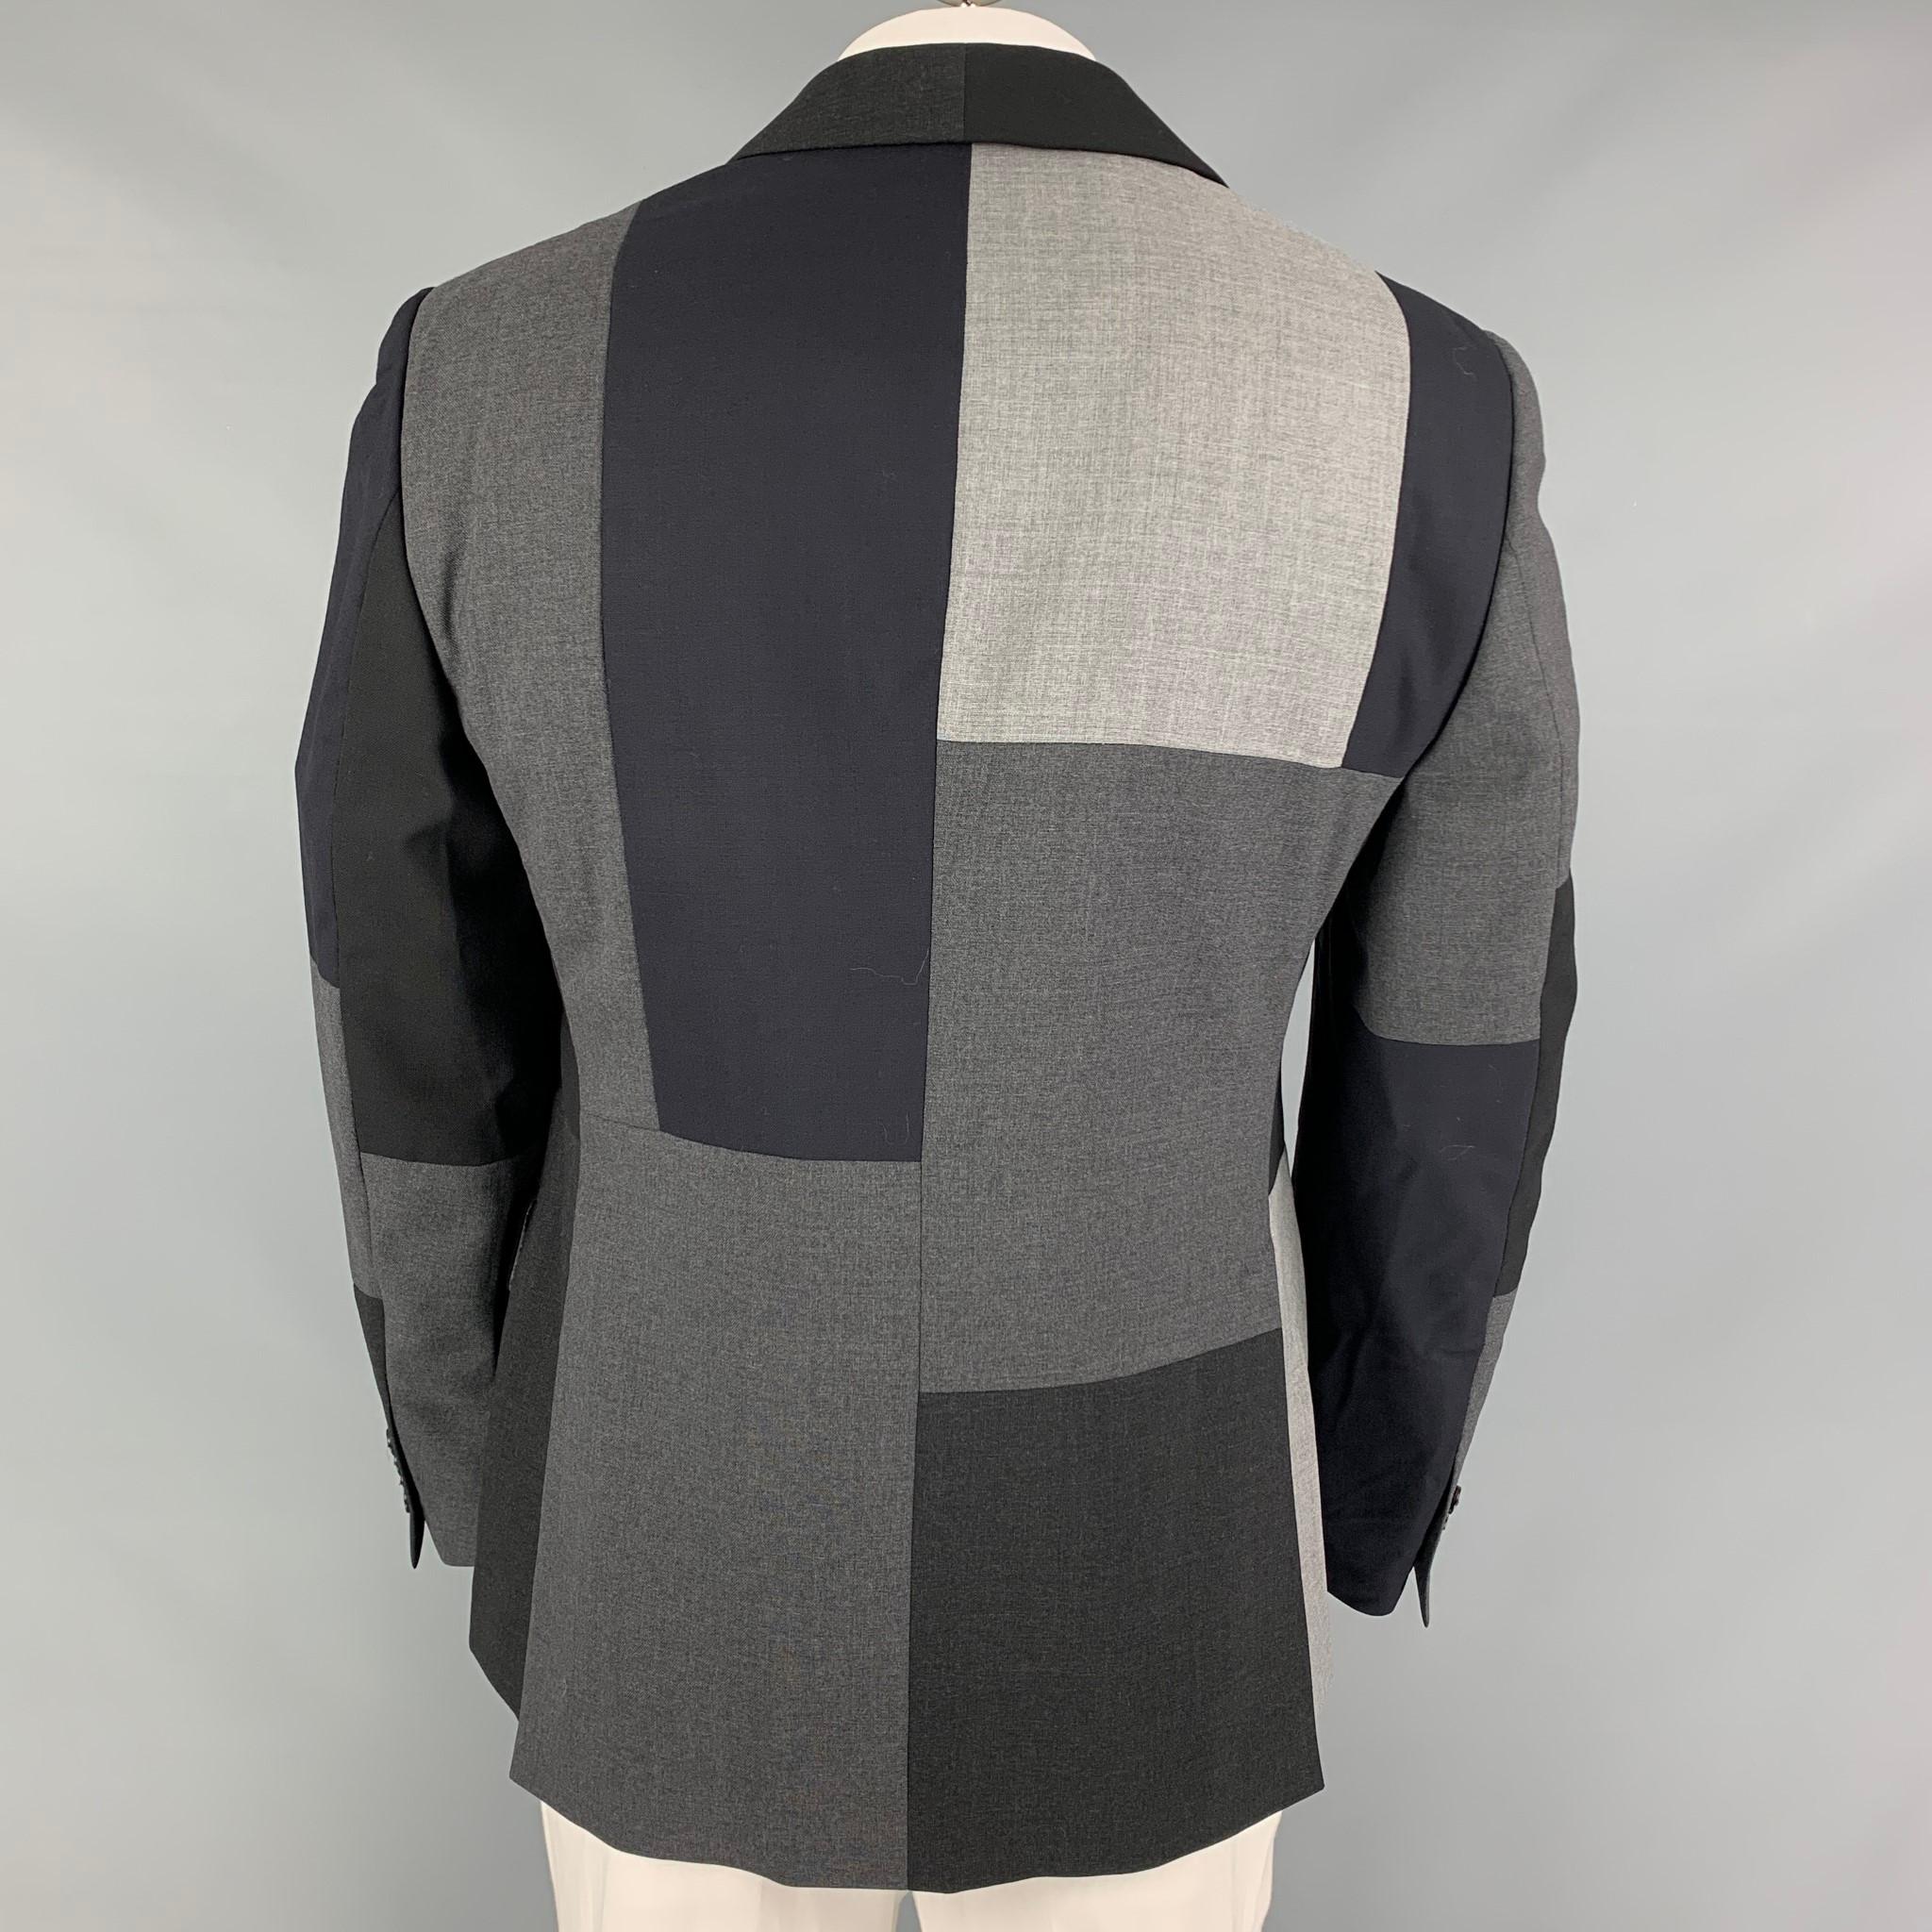 WOOSTER + LARDINI sport coat comes in a navy & grey patchwork  with a full liner featuring a notch lapel, flap pockets, double back vent, and a three button closure. Made in Italy. 

Excellent Pre-Owned Condition.
Marked: